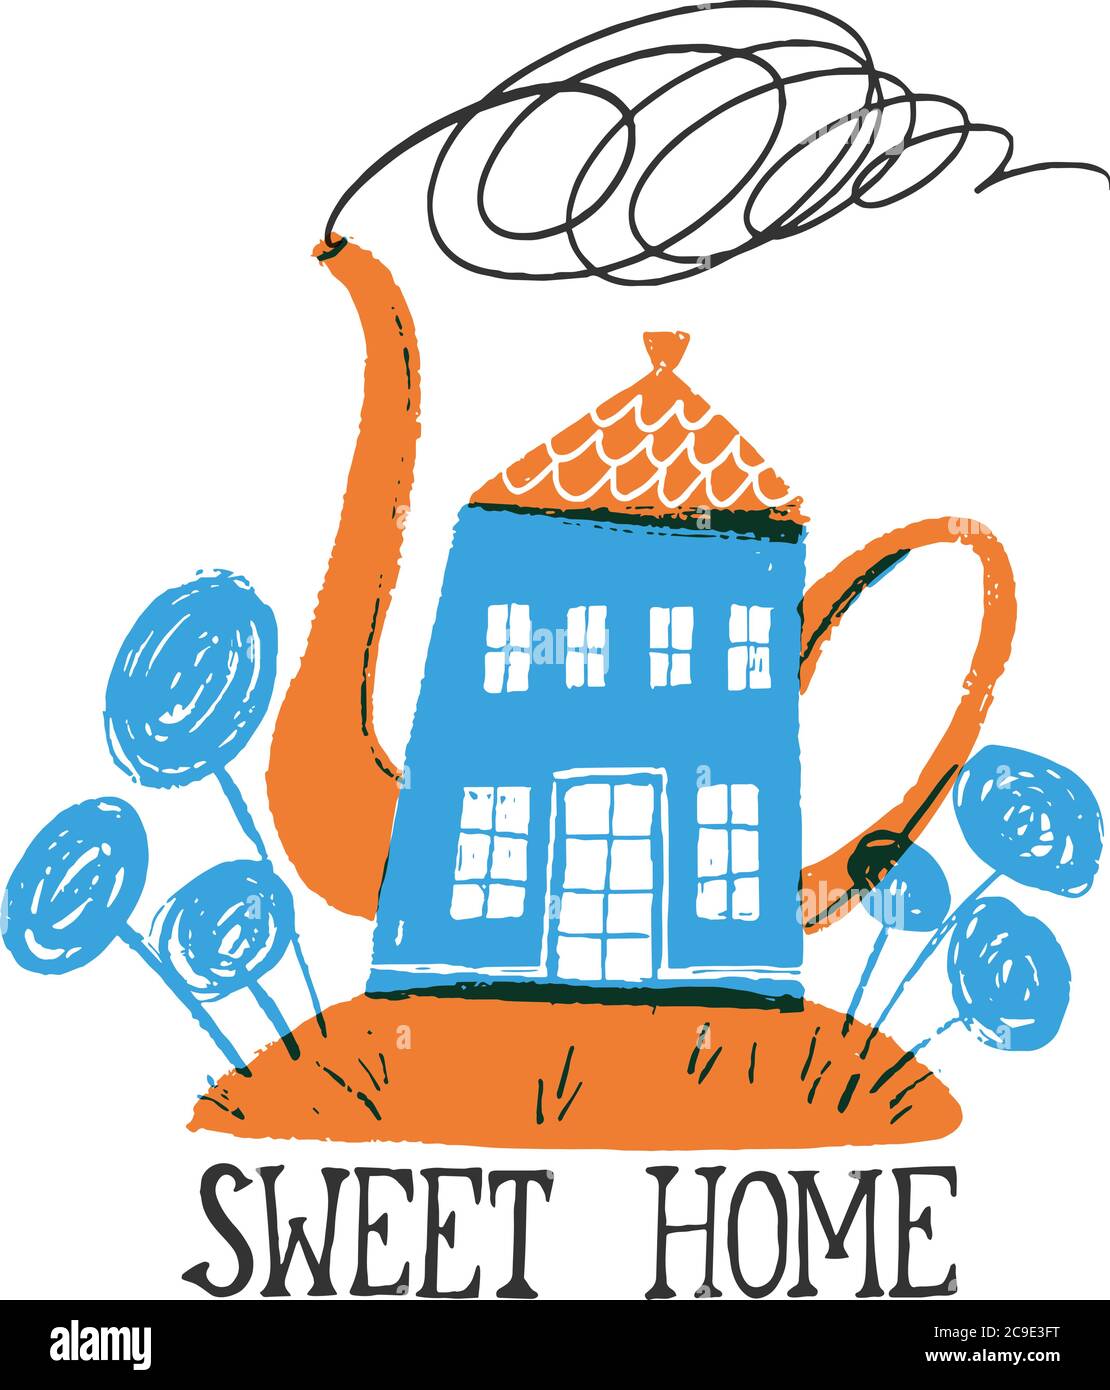 Sweet home vector card in stencil print technic Stock Vector